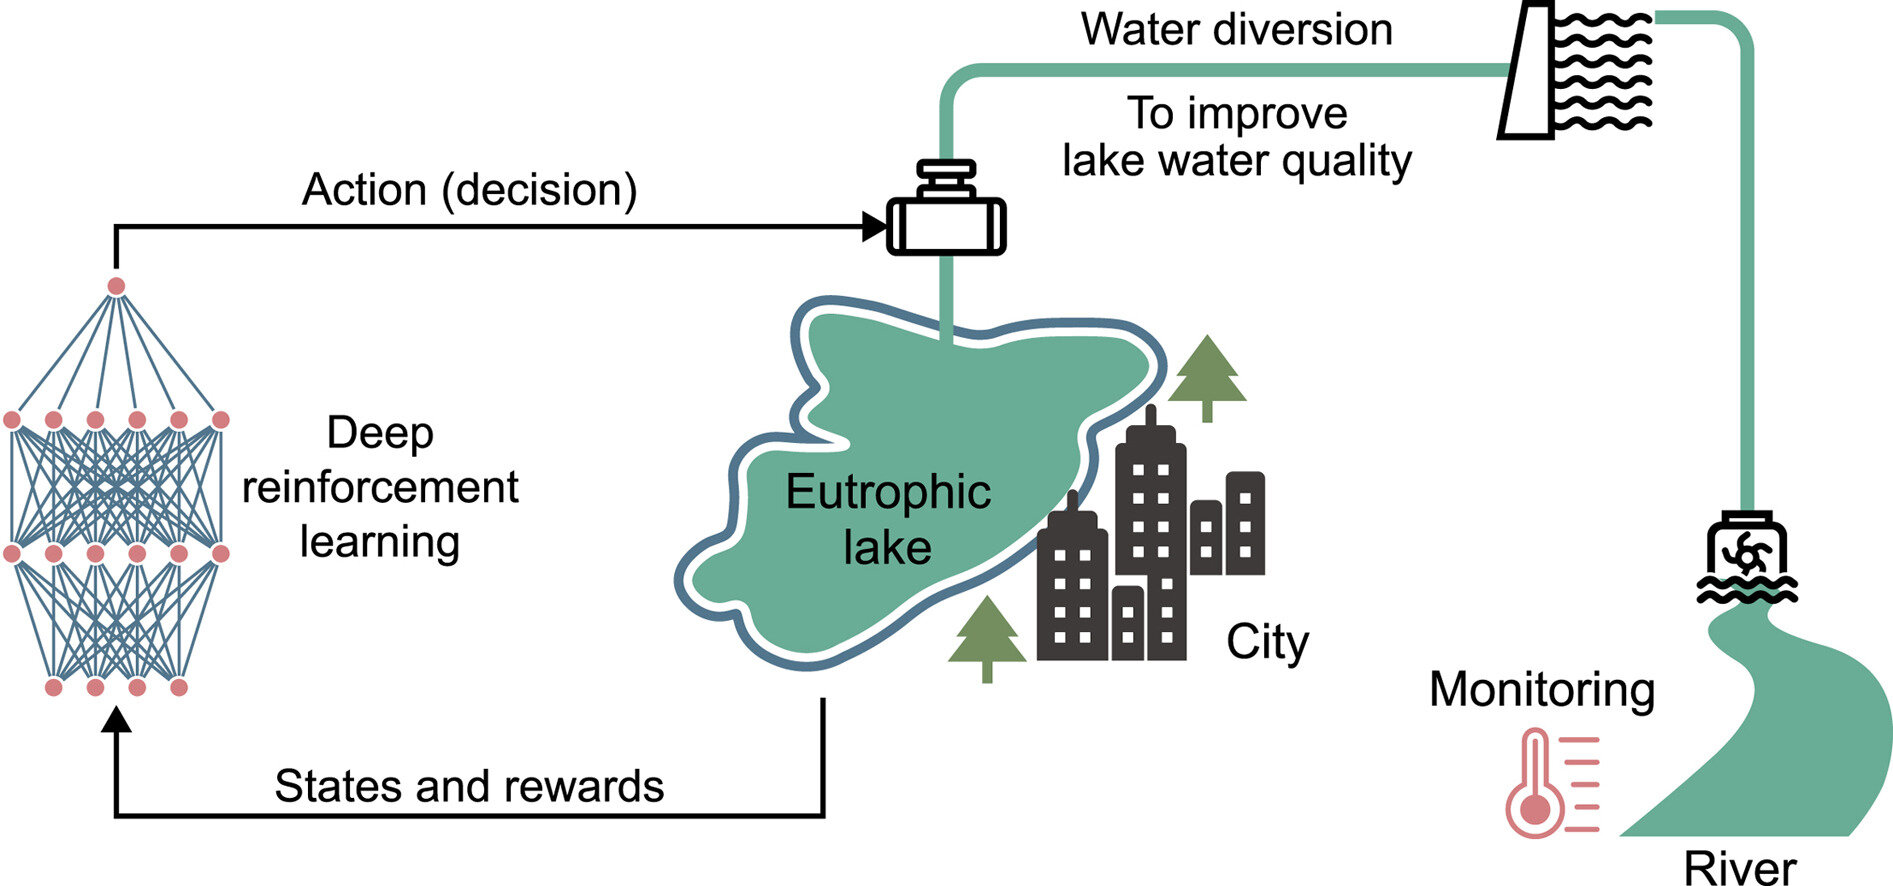 New optimization strategy boosts water quality, decreases diversion costs